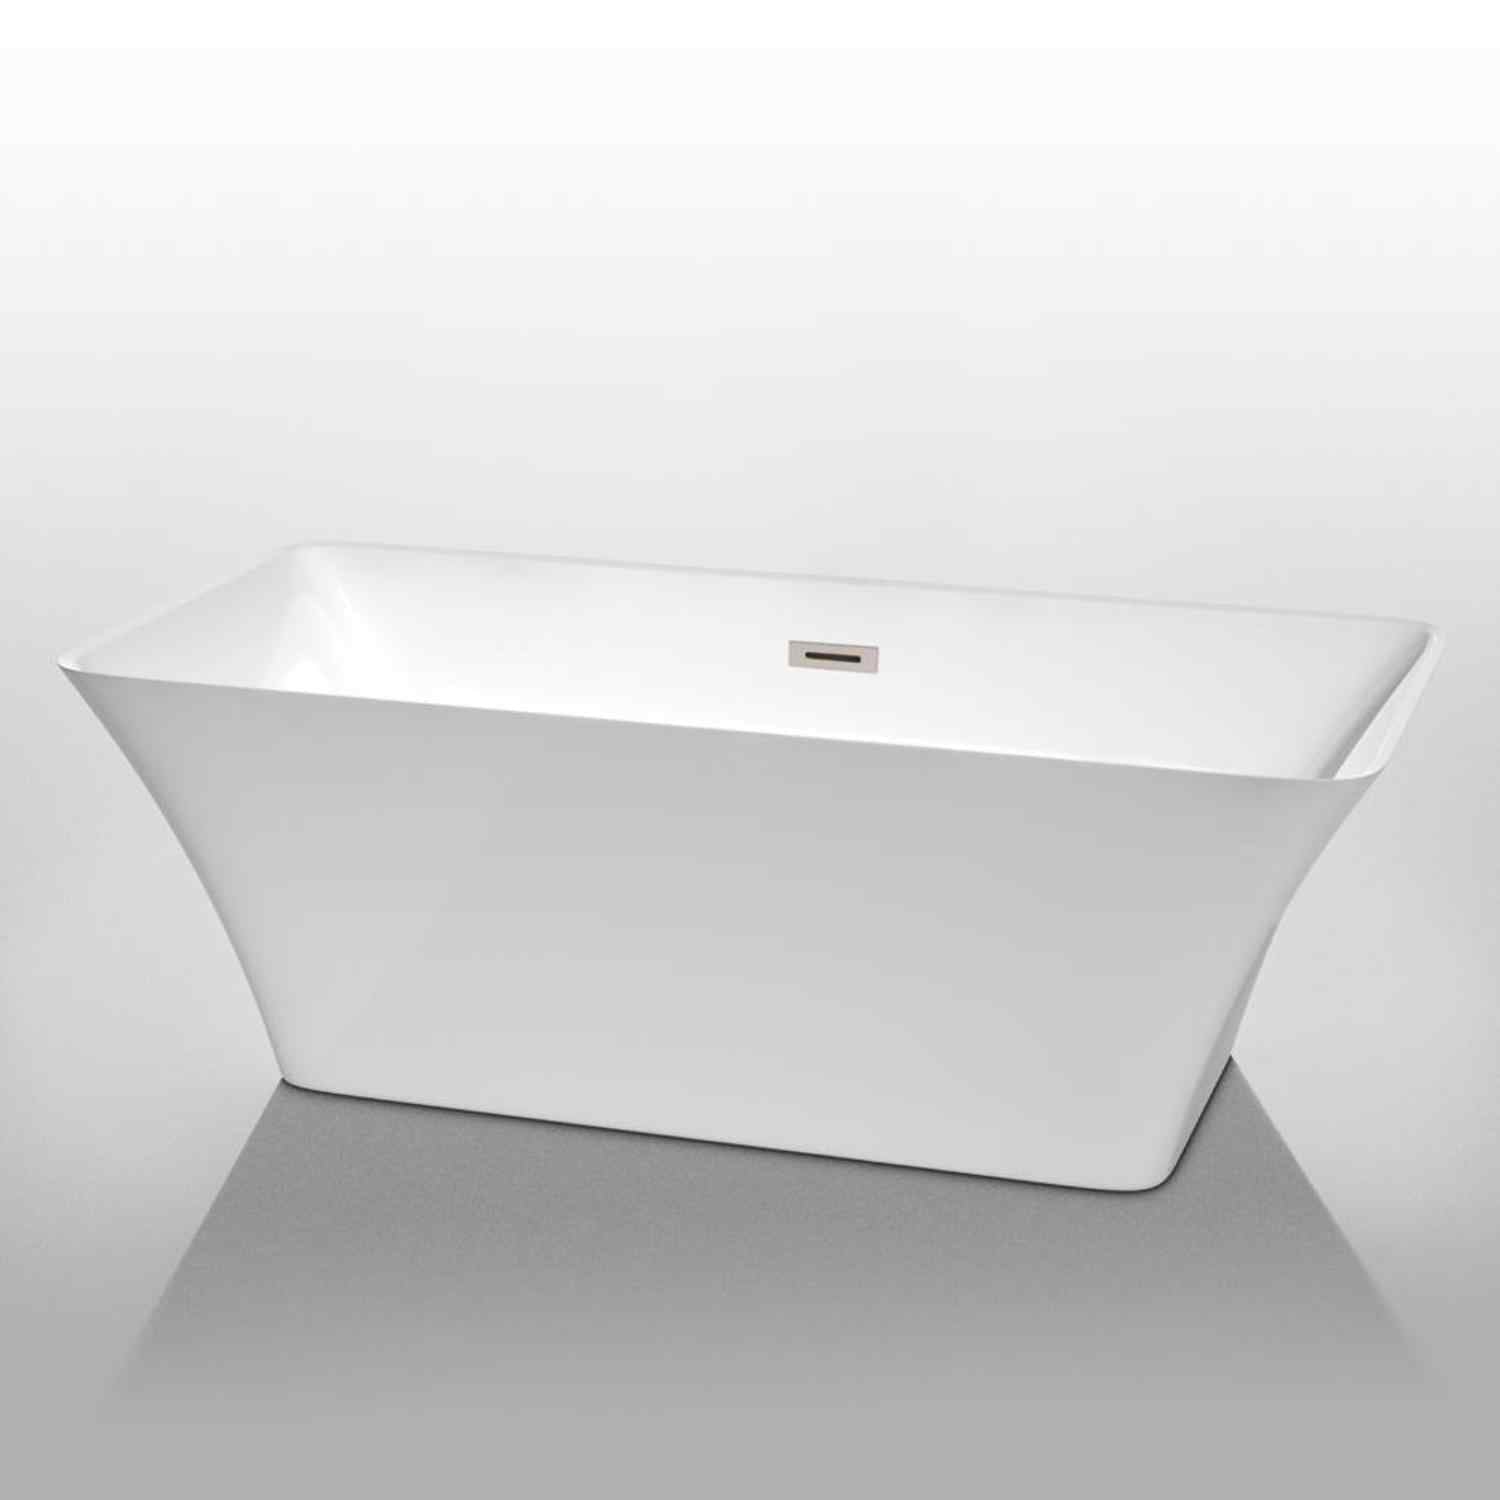 Wyndham collection Tiffany 67 Inch Freestanding Bathtub in White front view